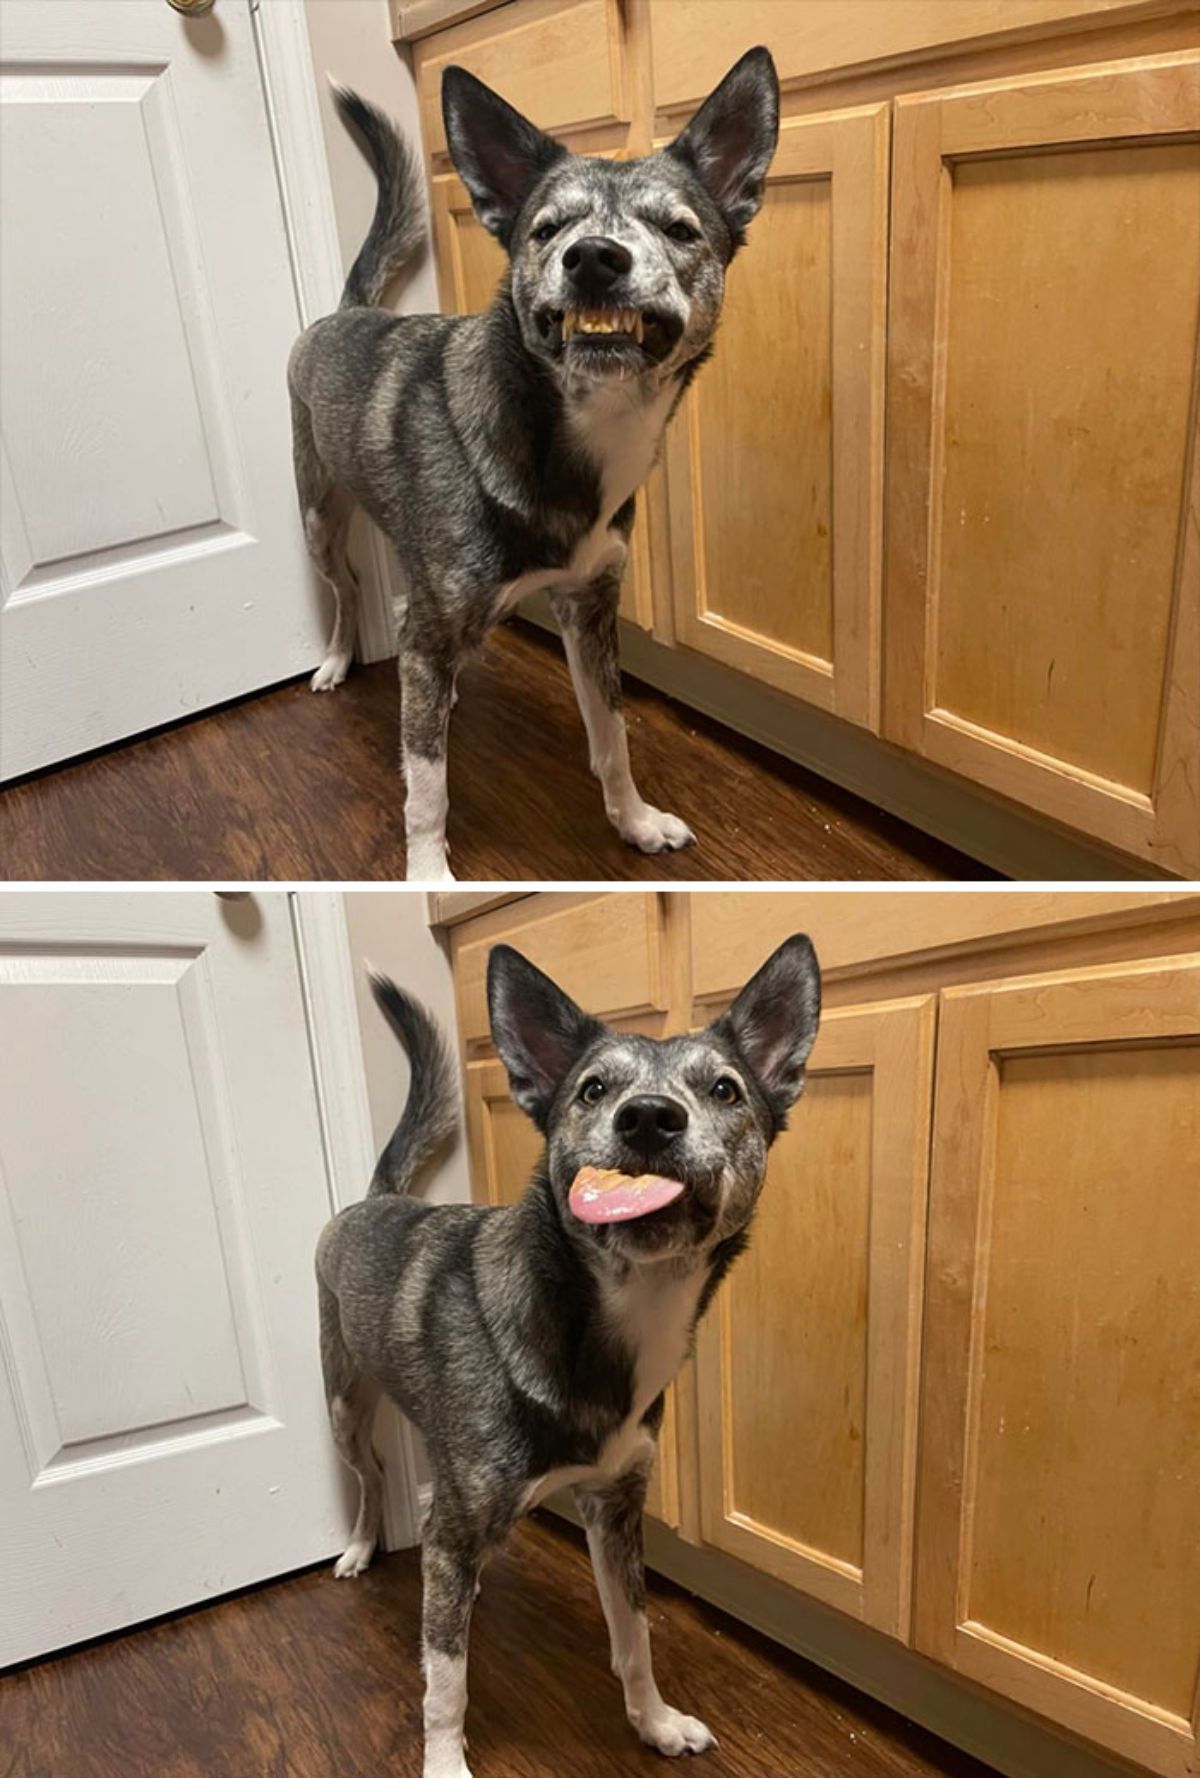 2 photos of a grey and white dog who has peanut butter stuck on its tongue